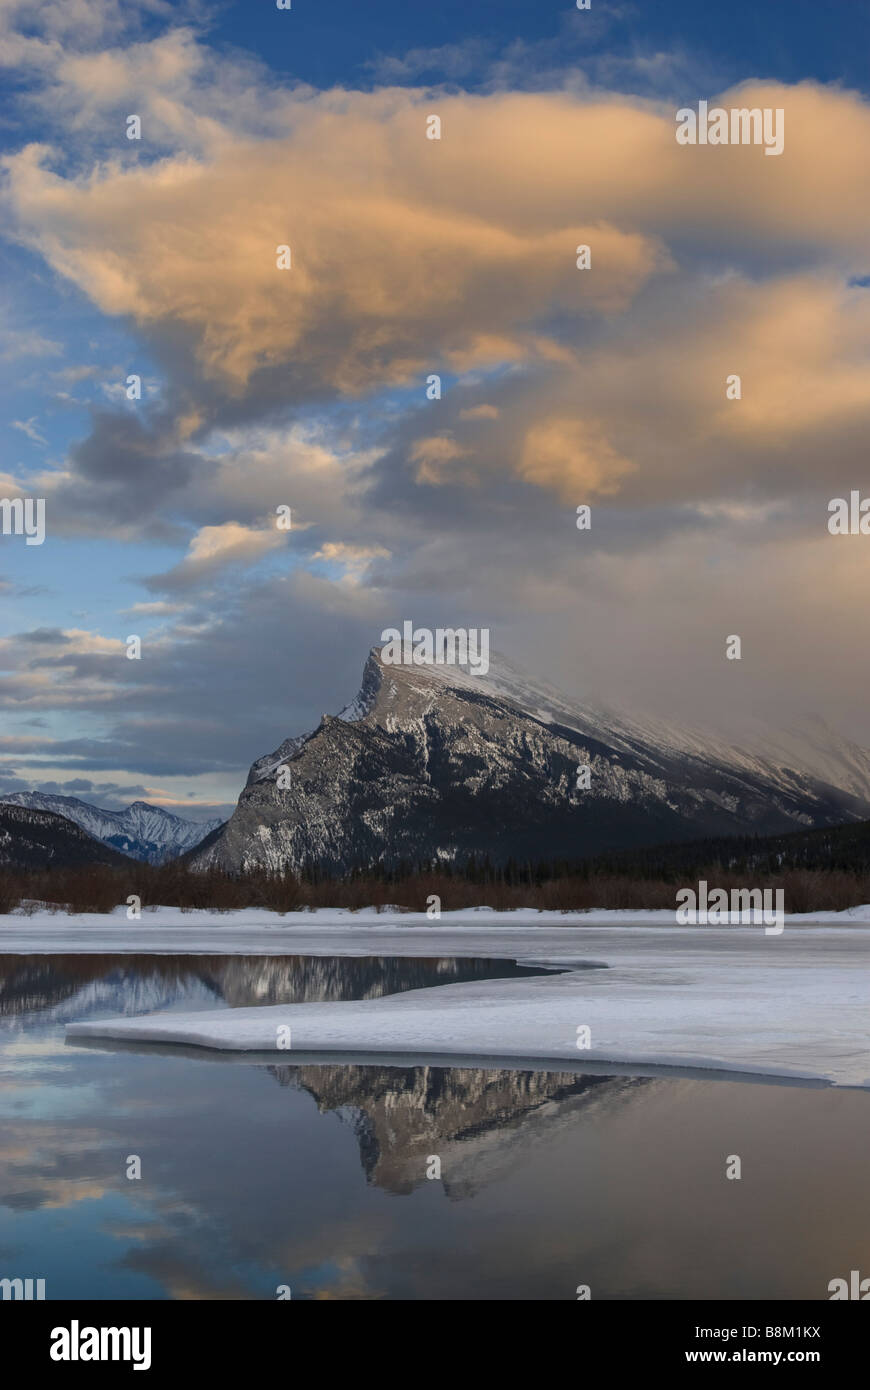 Mount Rundle from Vermilion Lakes in Banff National Park, Alberta, Canada. Stock Photo